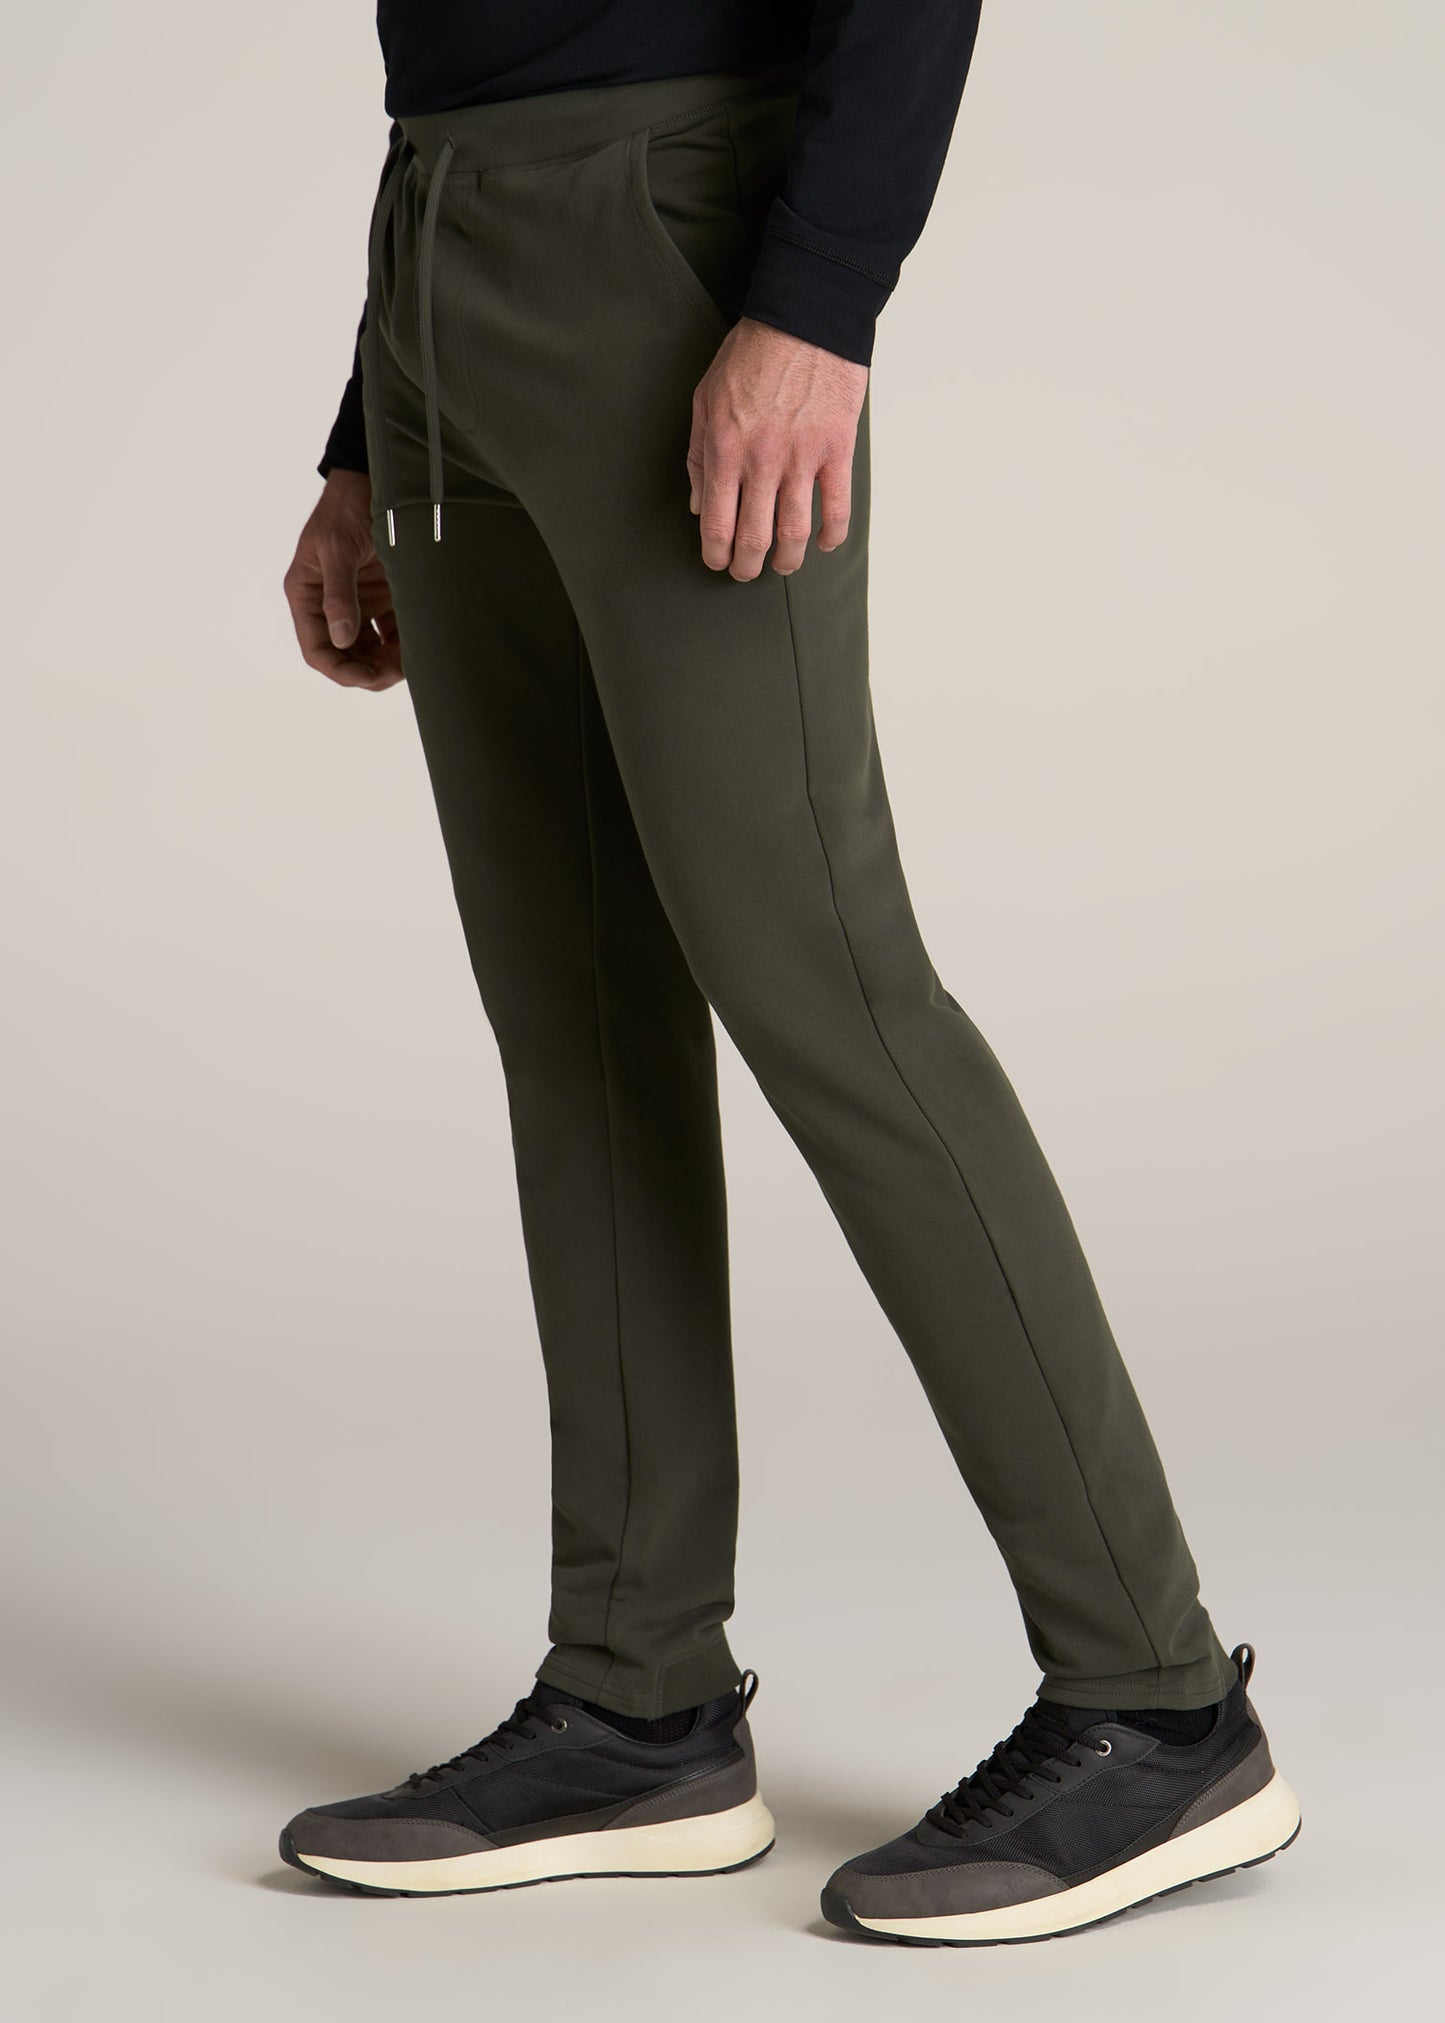 American-Tall-Men-Microsanded-French-Terry-Sweatpant-Hunter-Green-Side